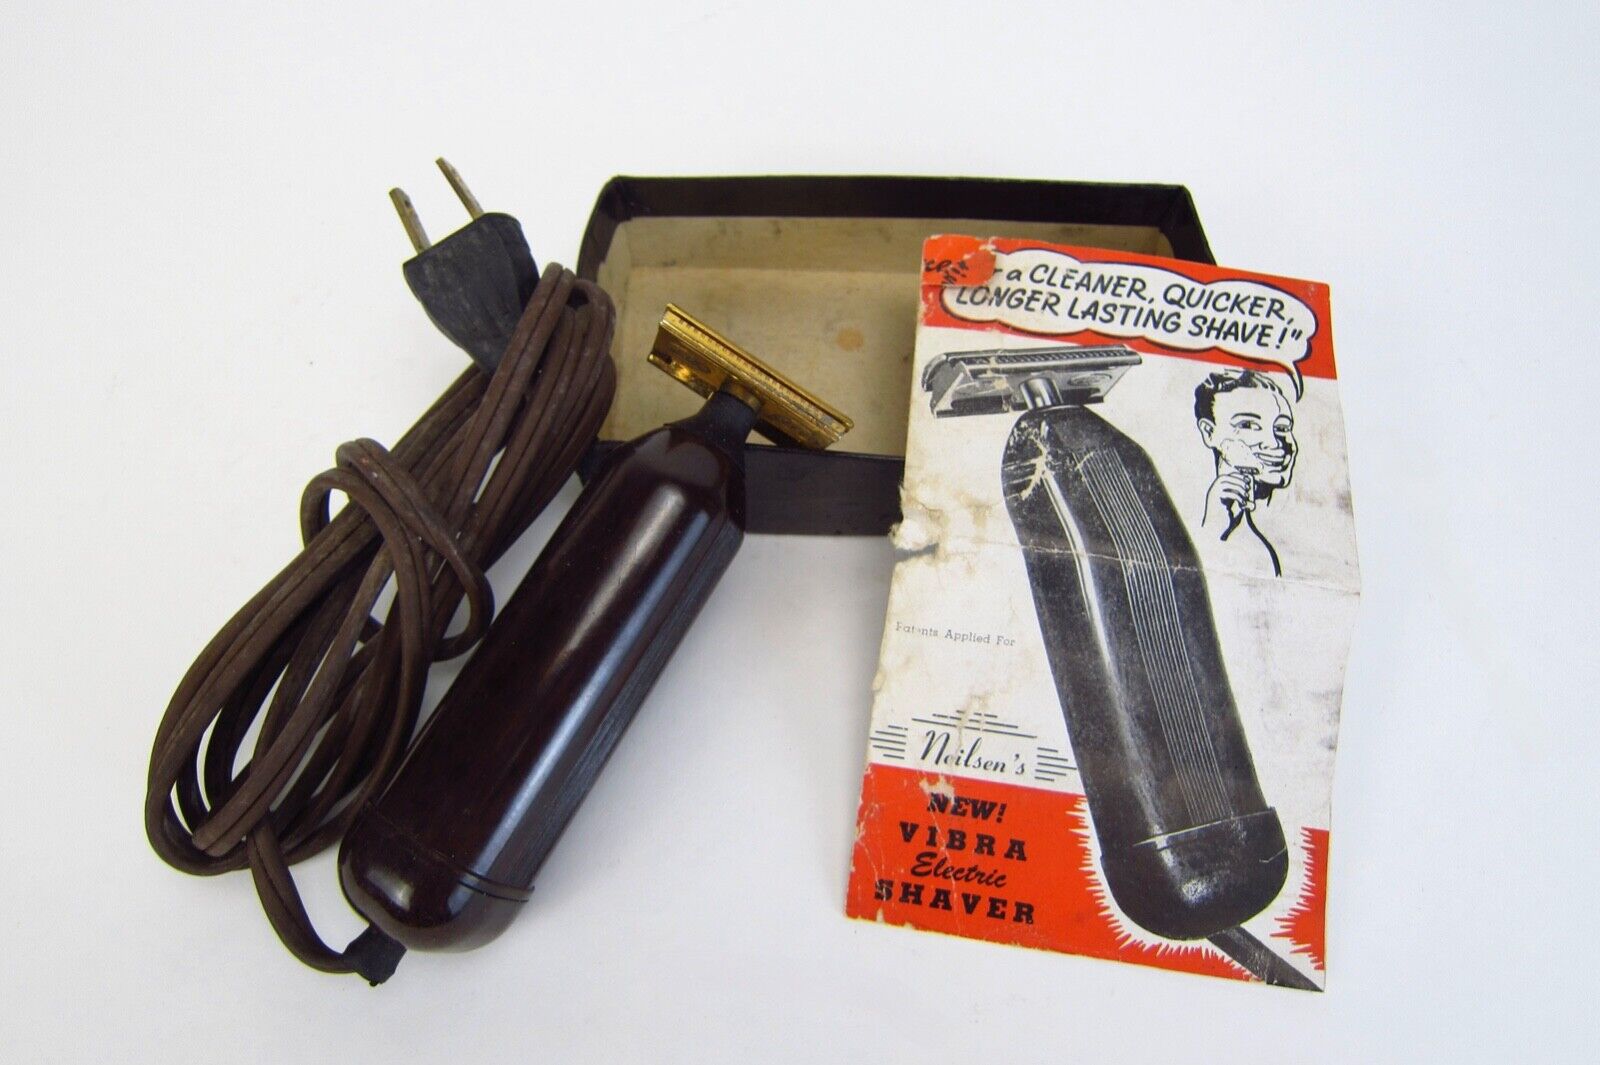 Vintage Neilsen Products Vibra Electric Shaver with Manual Working